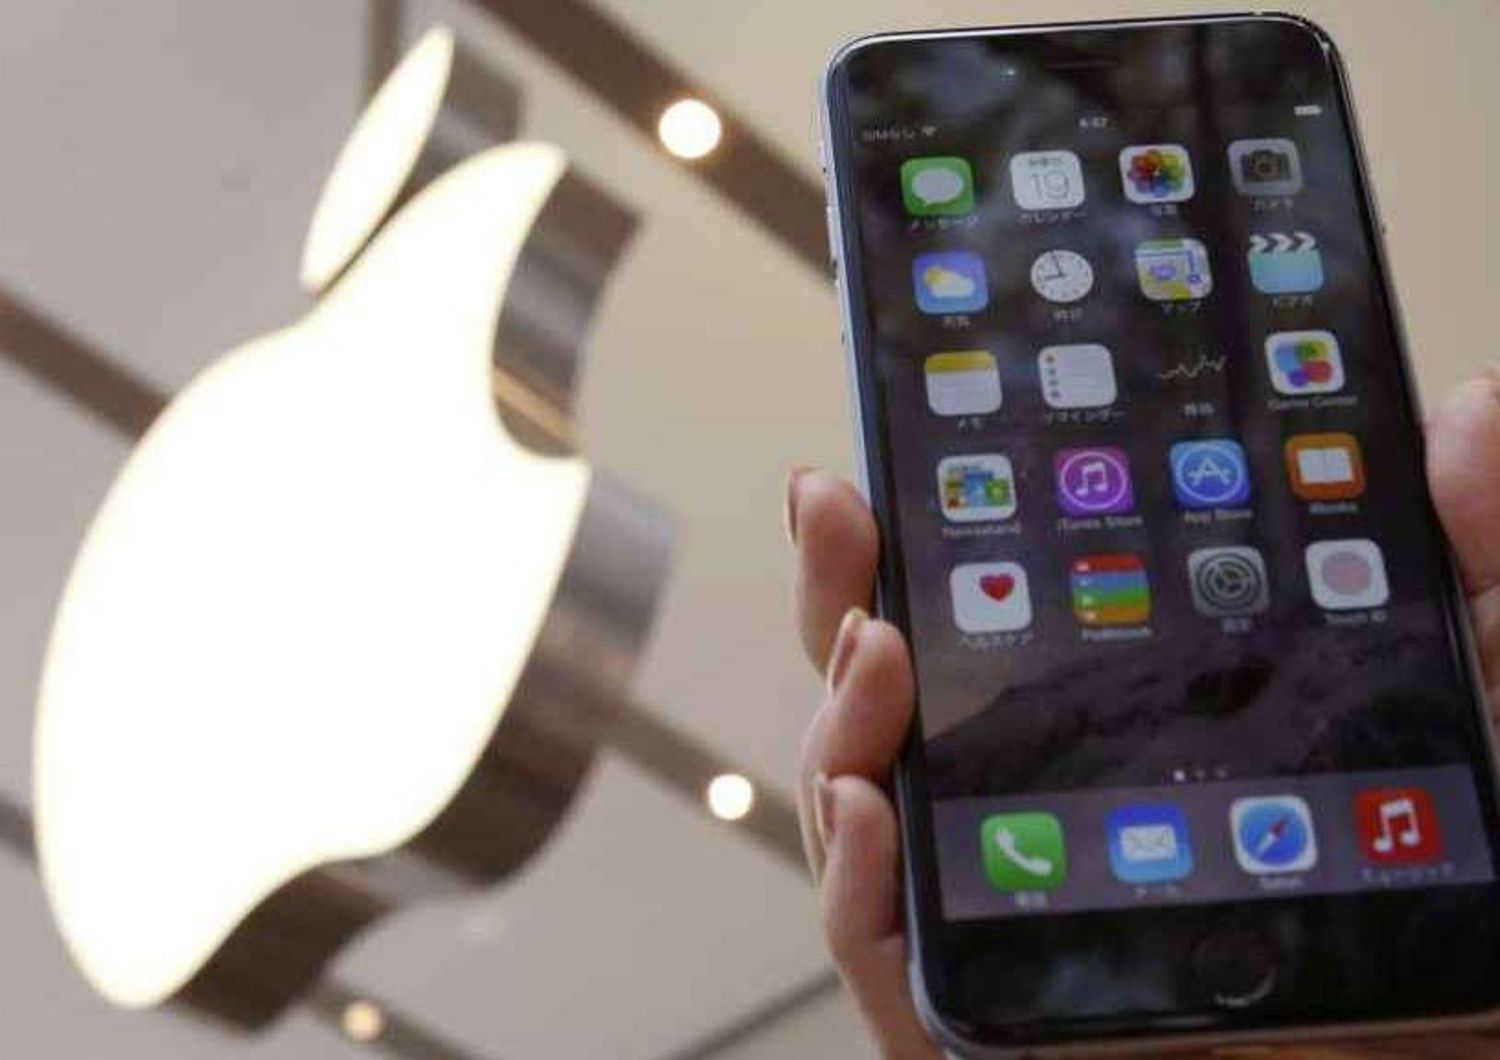 Apple iPhone release marred by 'Bendgate'